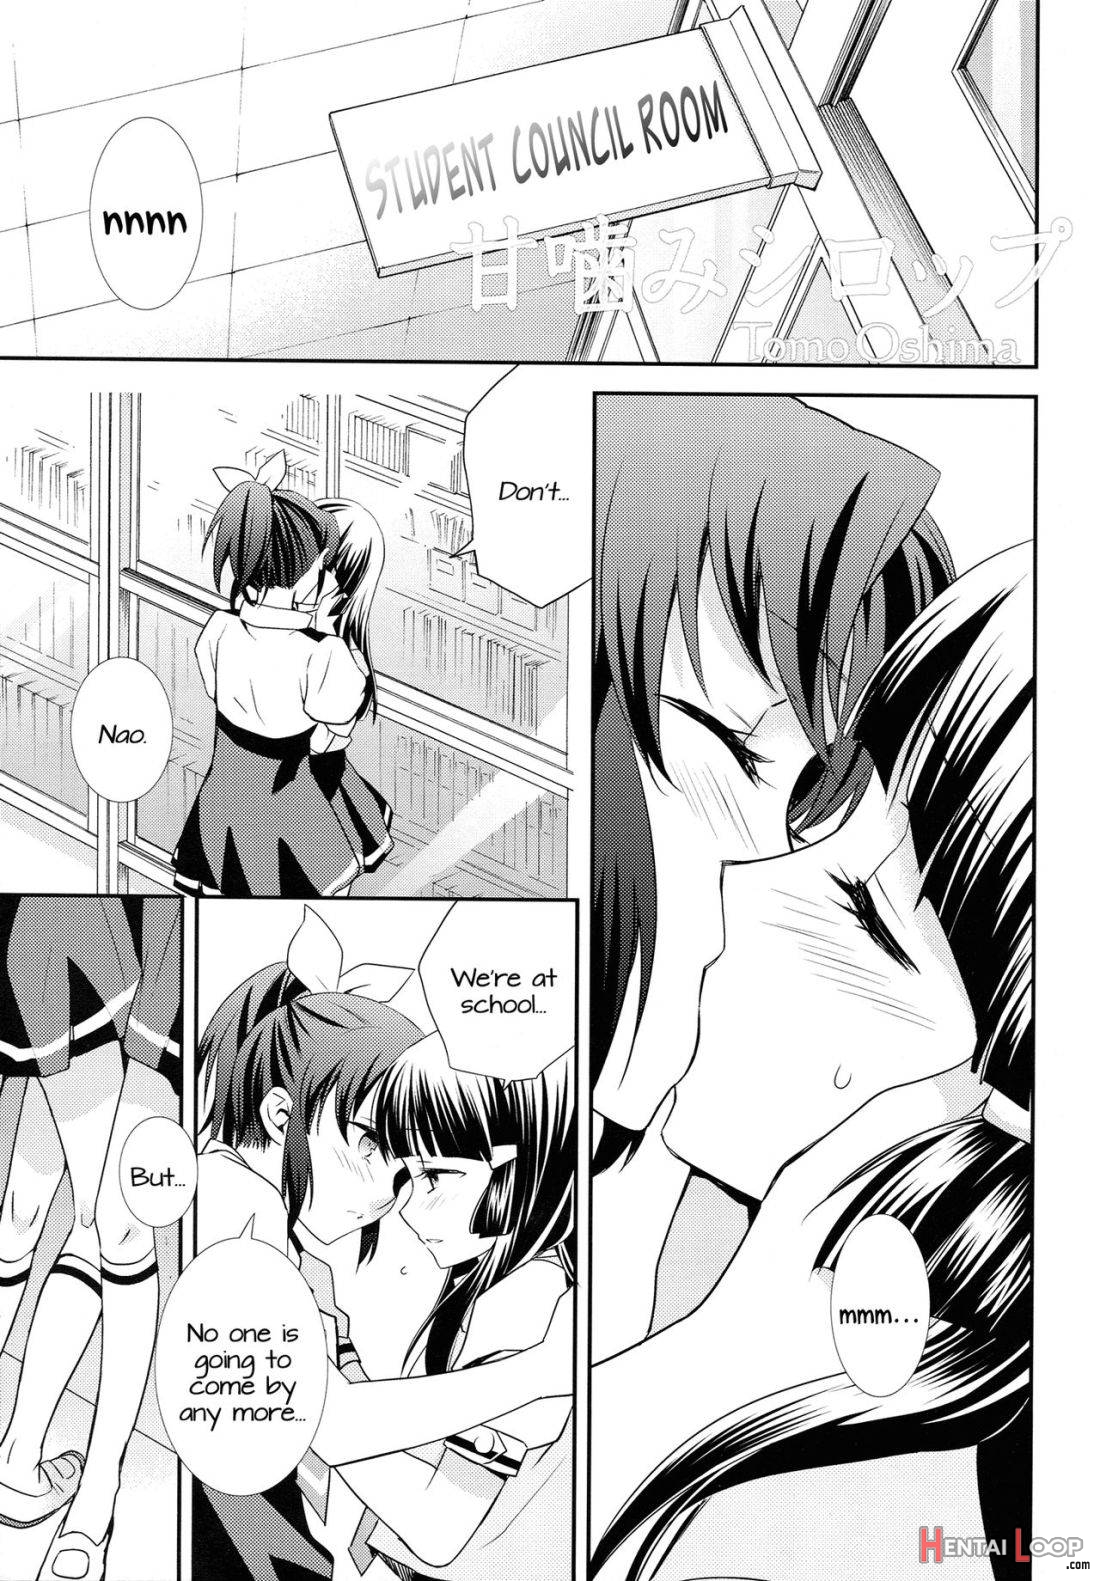 Amagami Syrup page 3